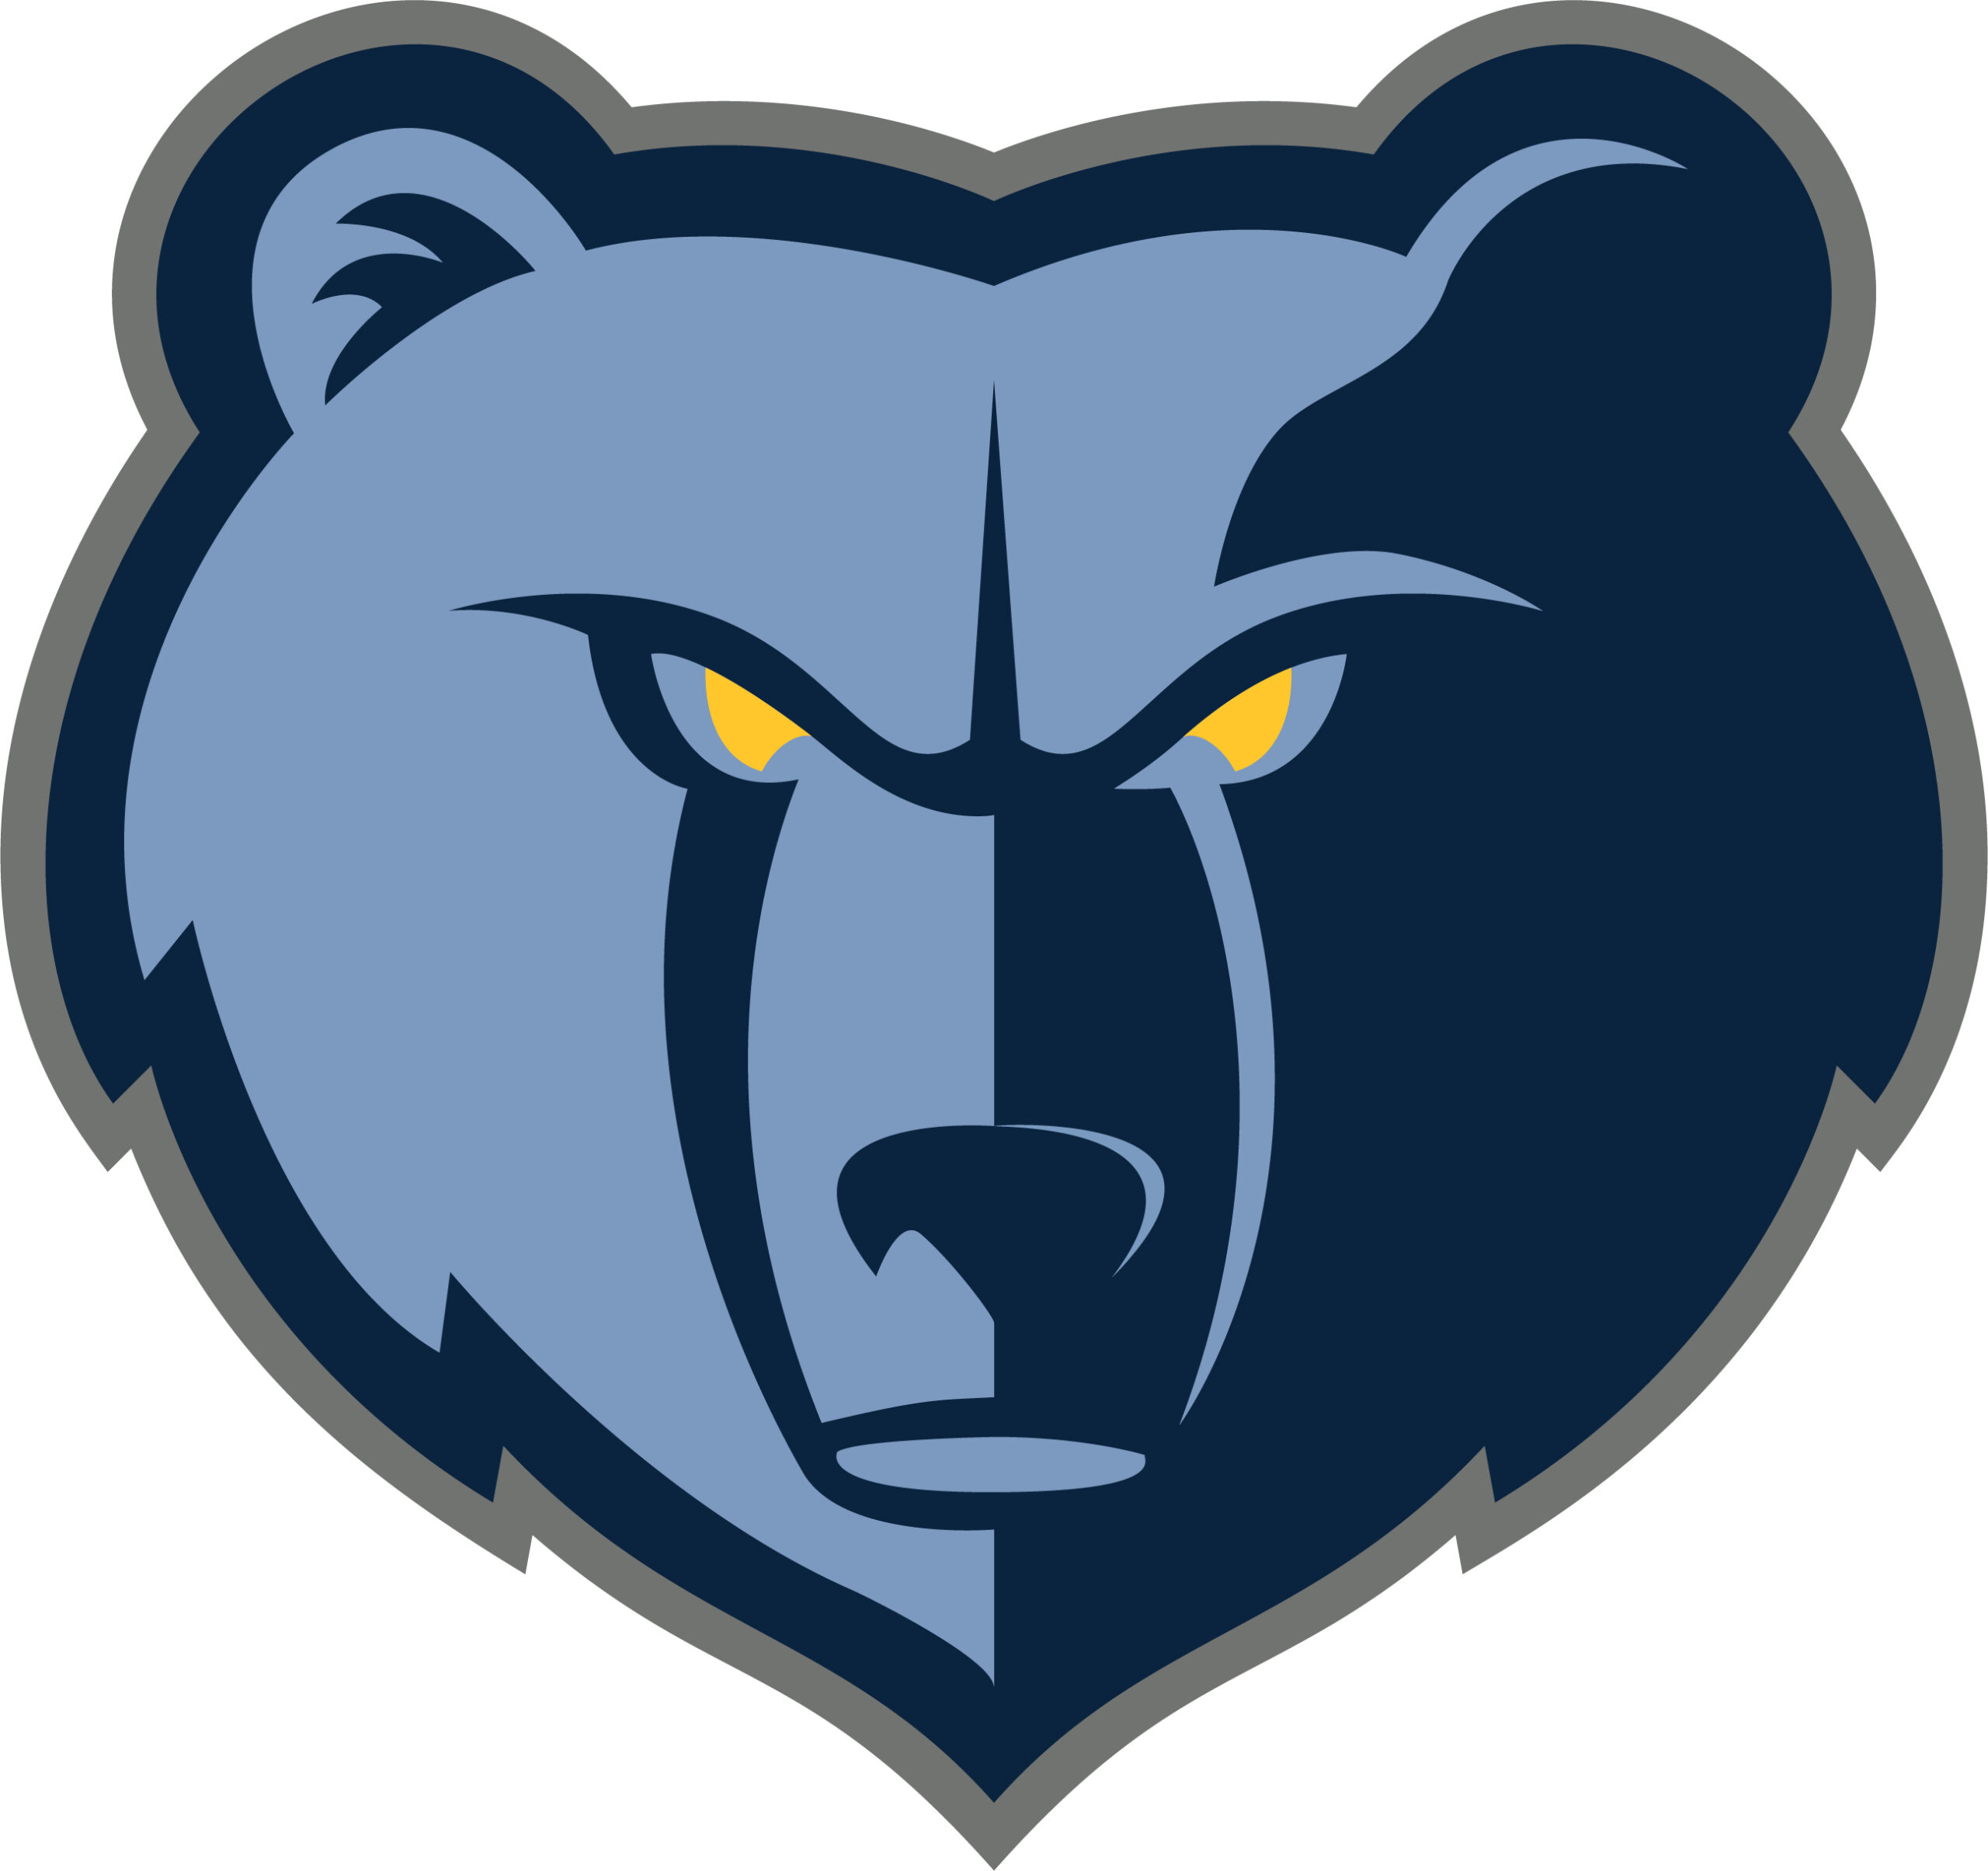 The Memphis Grizzlies logo represents the team's identity and brand. It is prominently displayed on their jerseys, merchandise, and promotional materials. The logo features a fierce grizzly bear roaring while holding a basketball